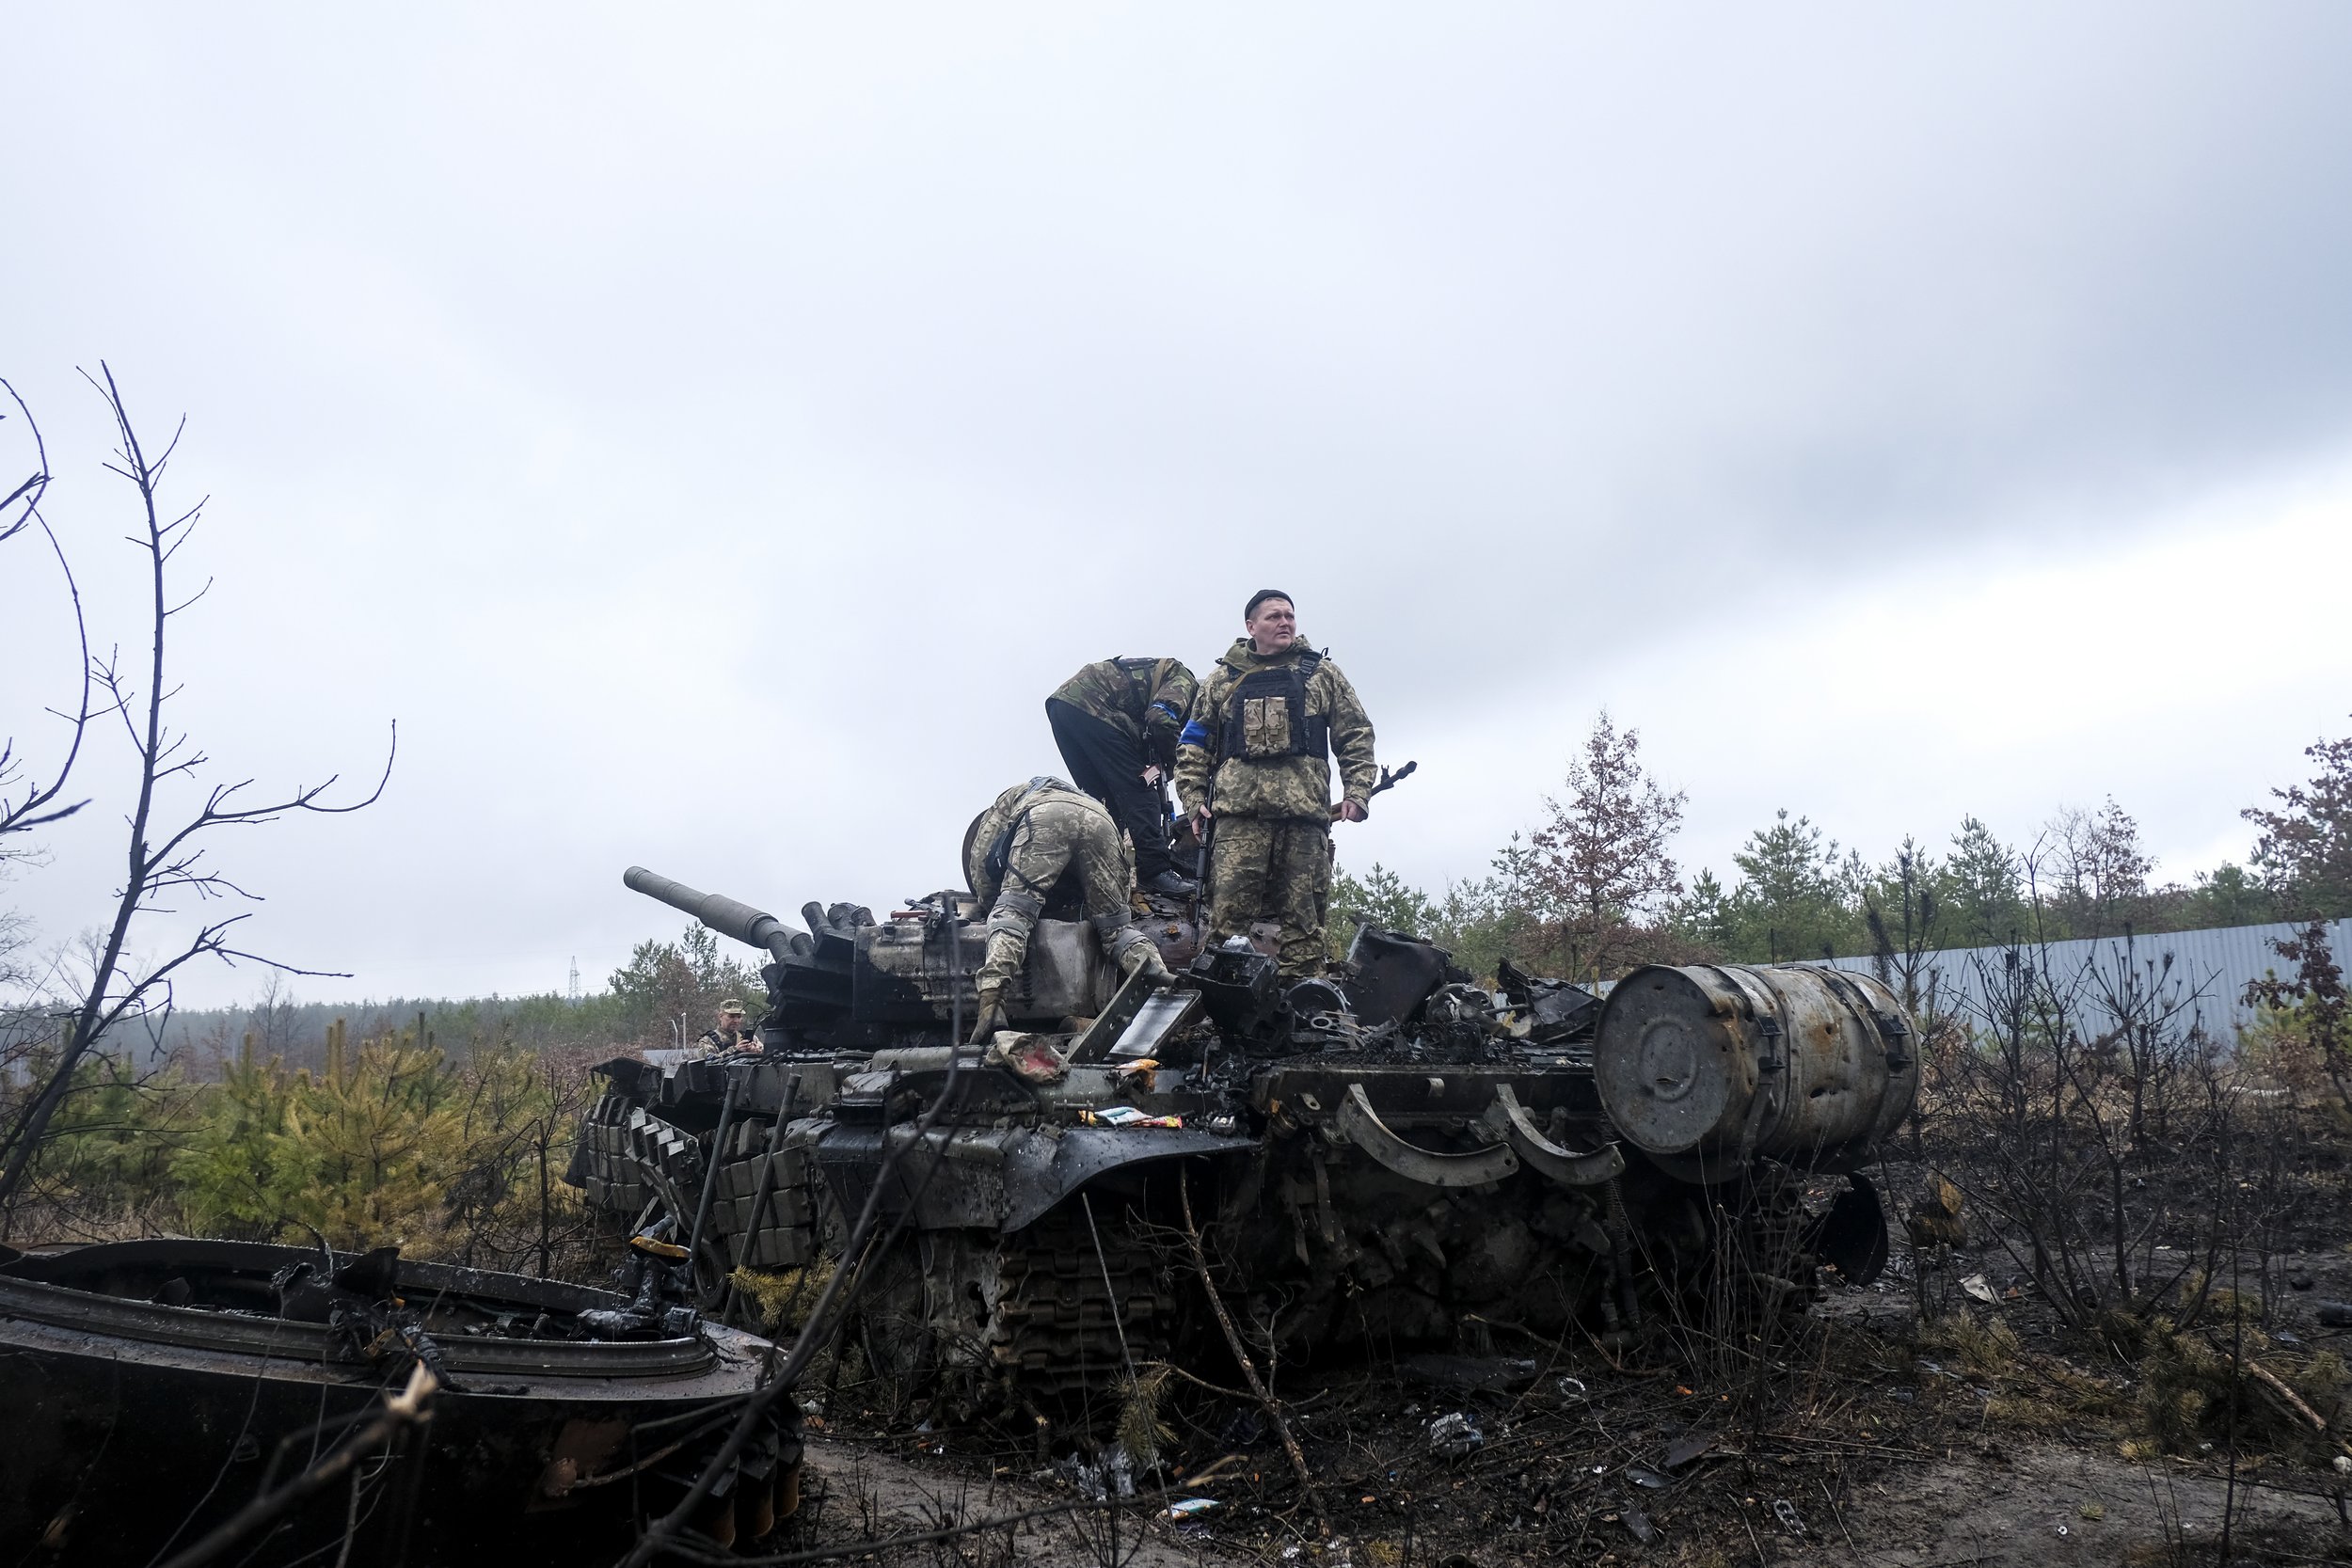  Ukrainian soldiers strip a Russian tank following an ambush that wiped out a column of Russian armored vehicles on April 3, 2022. Well-placed ambushes, javelins, and Ukrainian knowledge of the area eventually forced Russian troops to withdraw from t